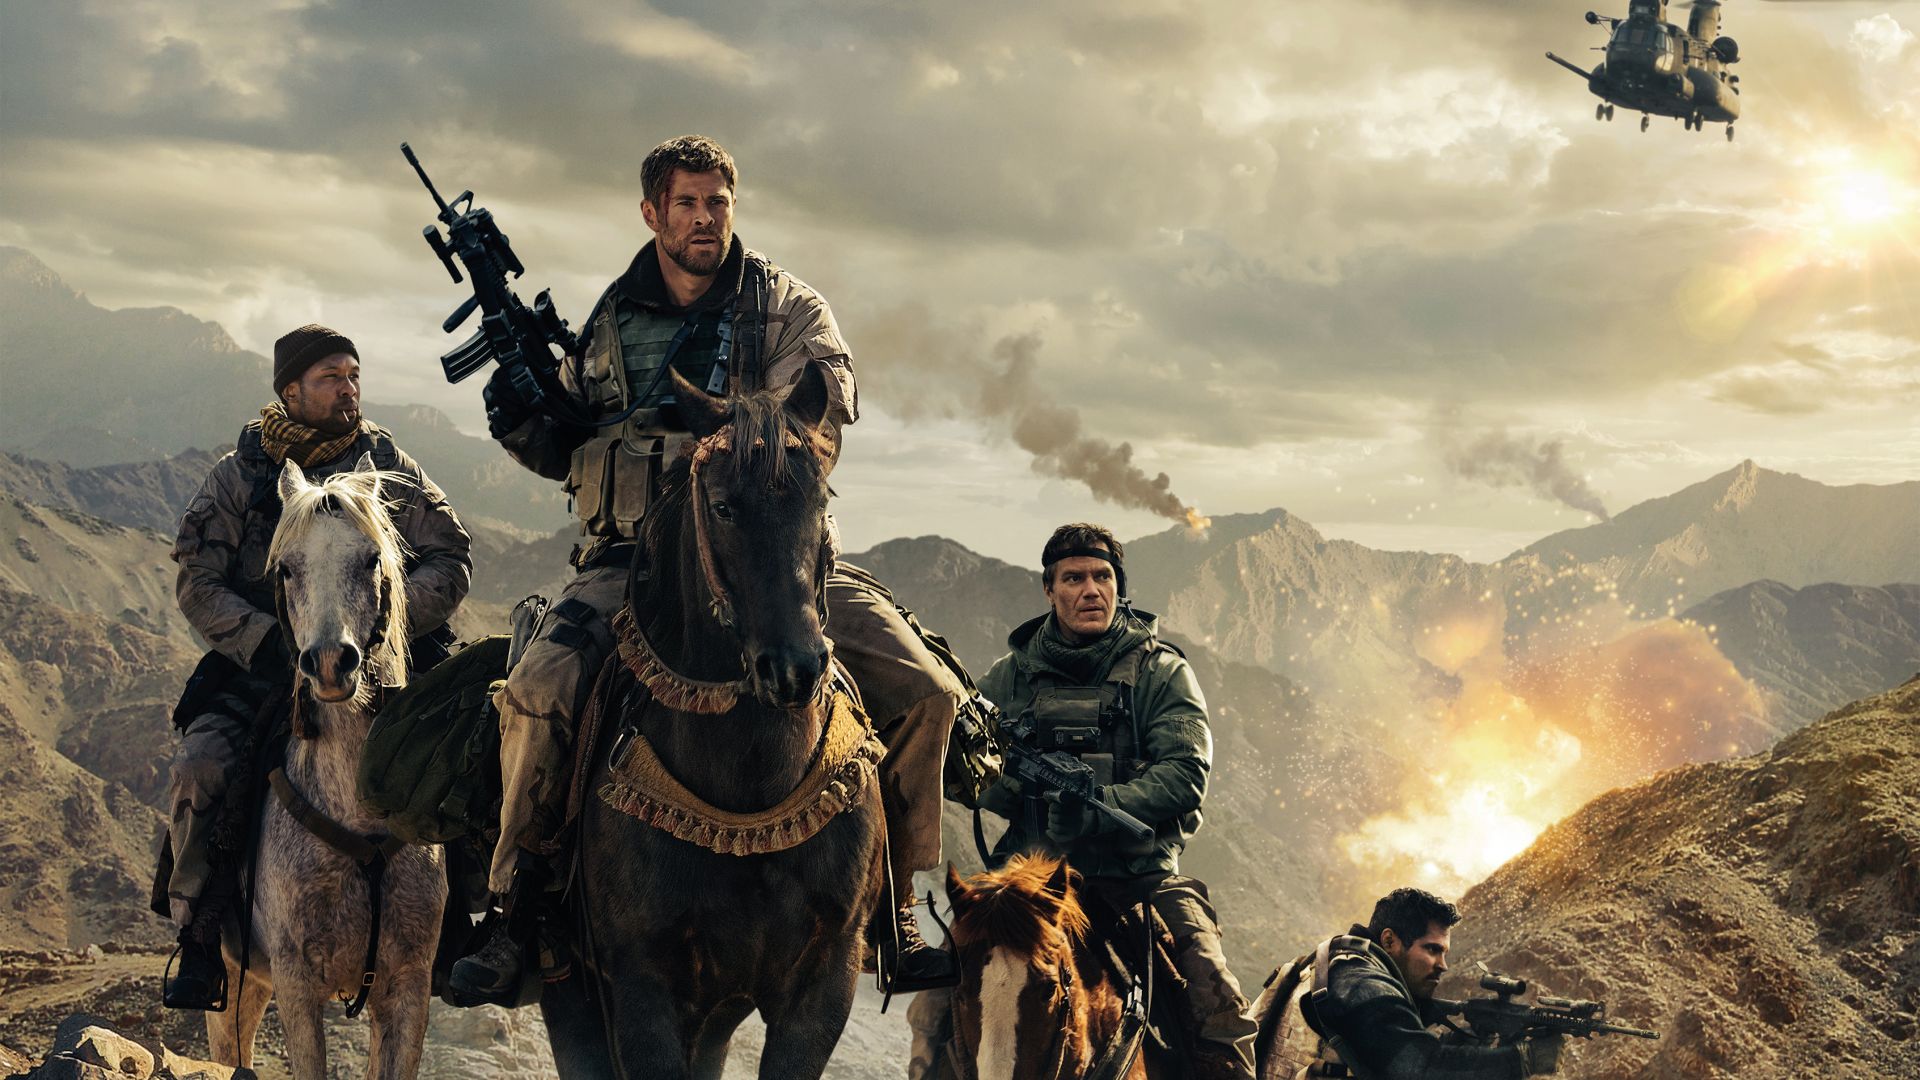 Wallpaper 12 Strong, 2018 movie, horse ride, soldiers, 4k